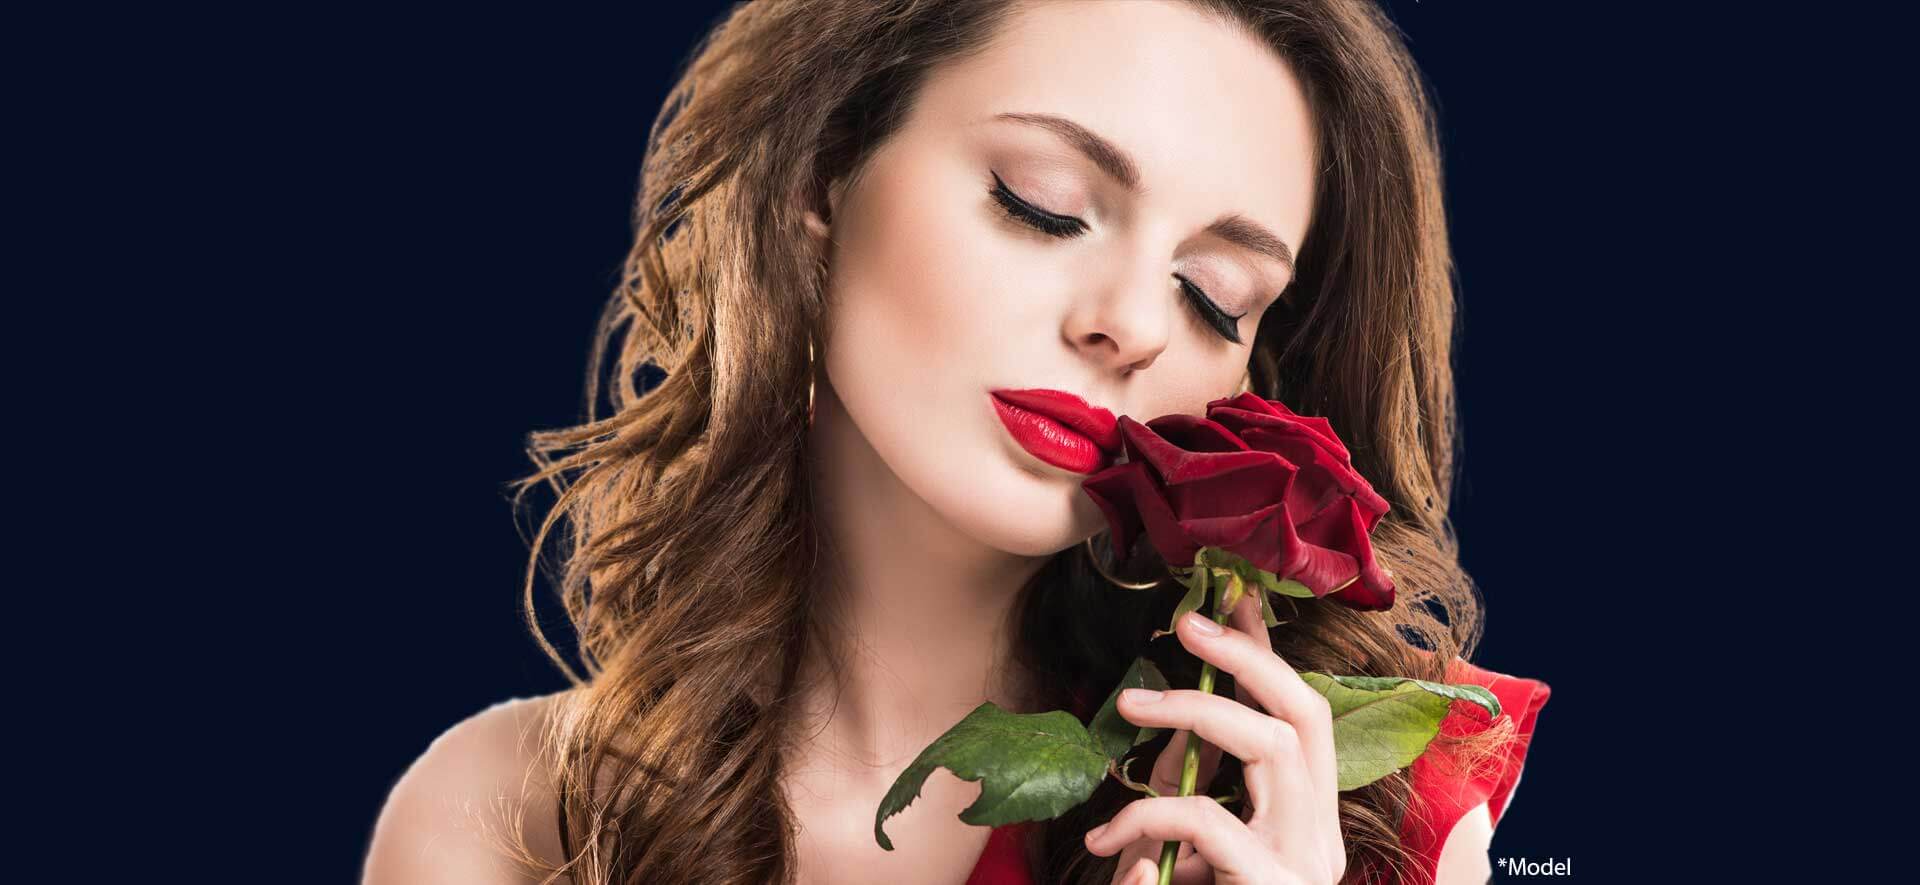 Stylish sensual girl touching face with rose isolated on dark background